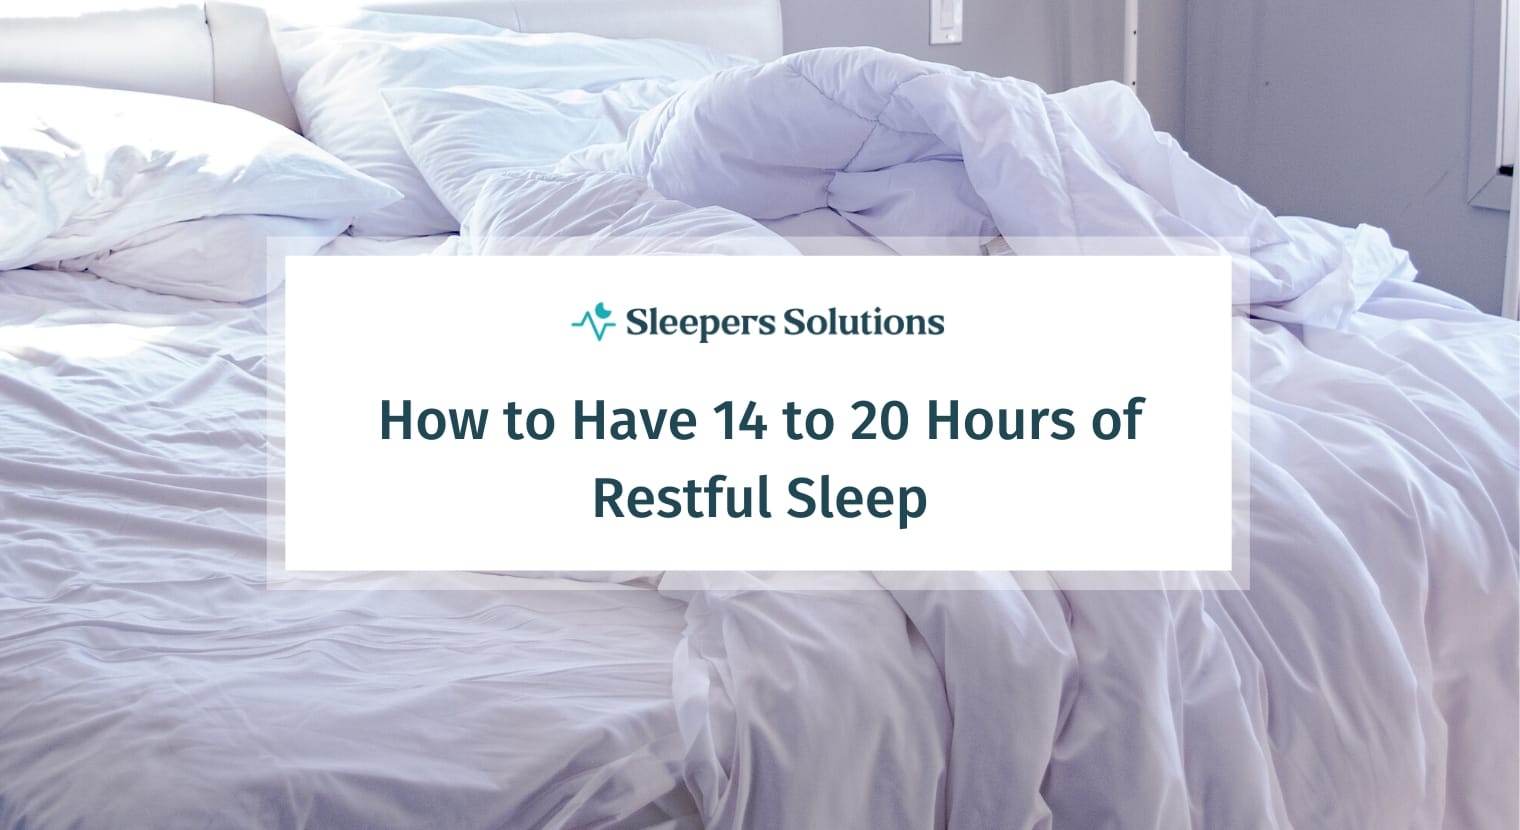 How to Have 14 to 20 Hours of Restful Sleep